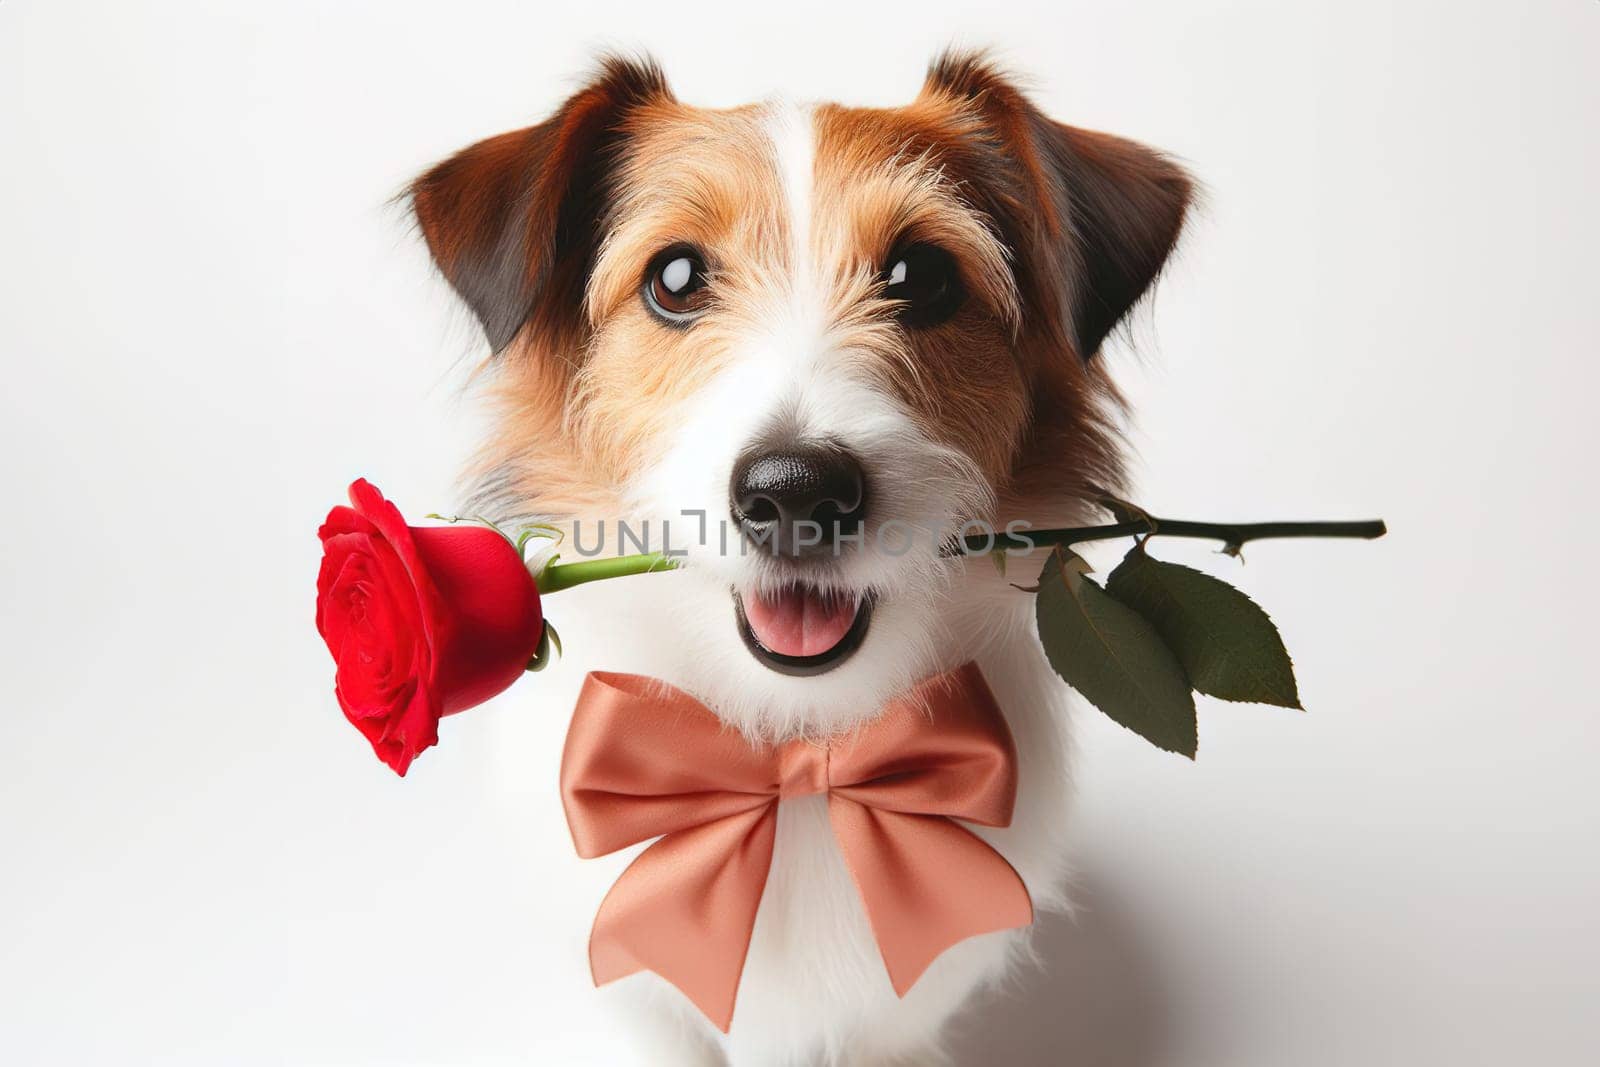 Cute portrait dog sitting and looking at camera with red rose in its mouth by EkaterinaPereslavtseva